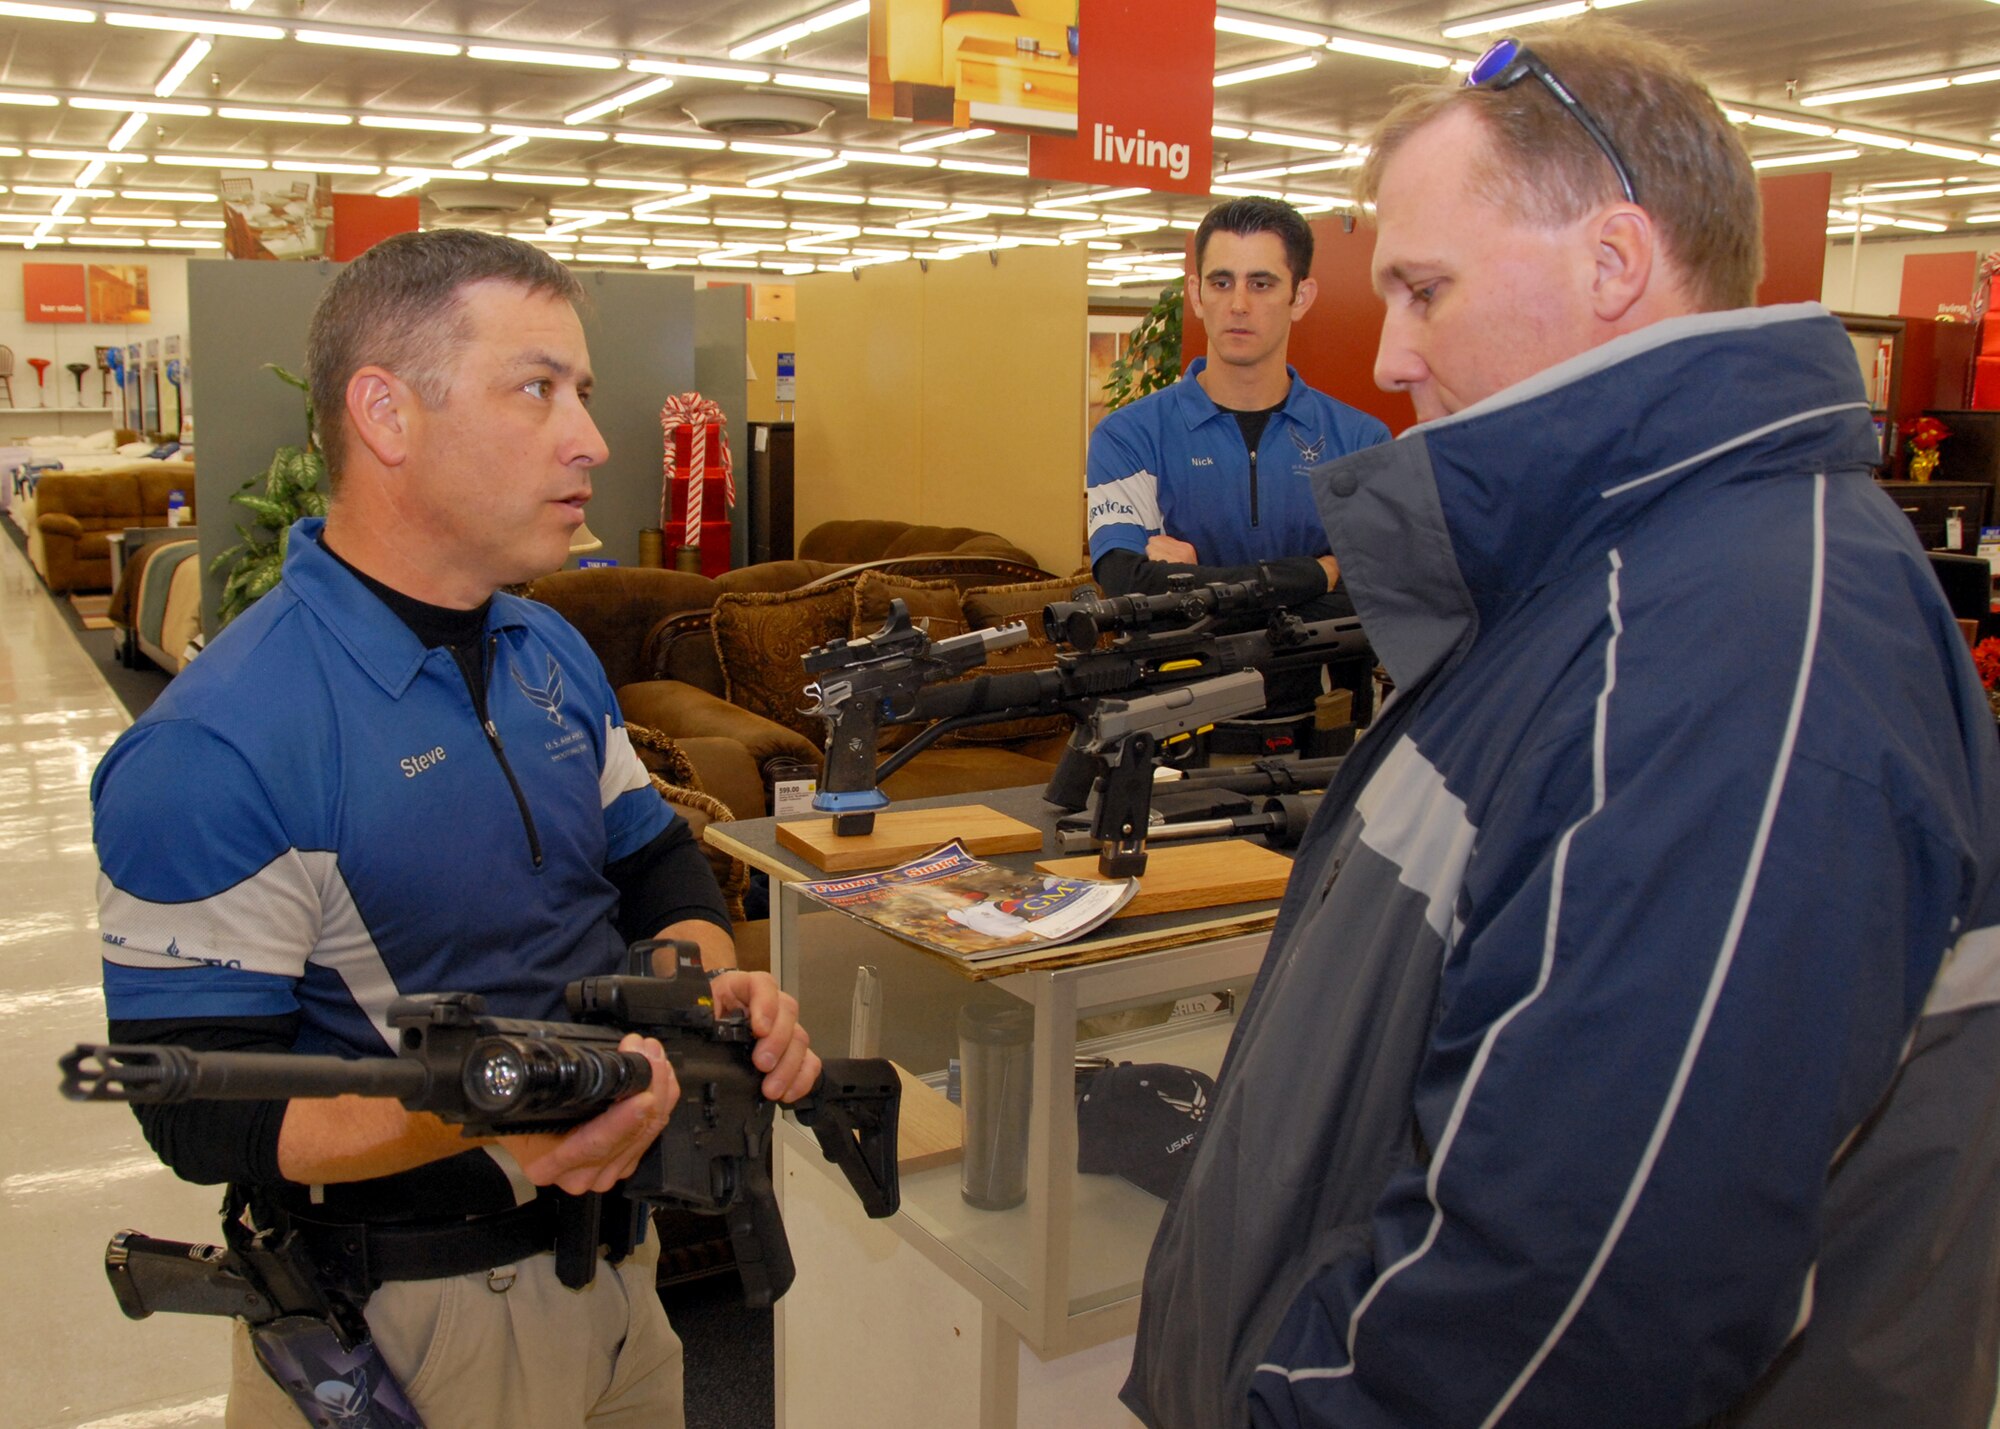 Maj. Steve Dennis, Air Force Action Shooting Team captain, shows a Colt Law Enforcement Military Use AR-15 rifle to Greg Hoffman, 28th Test and Evaluation Squadron, at the shooting display at the base exchange.  (U.S. Air Force photo/Kevin Gaddie)